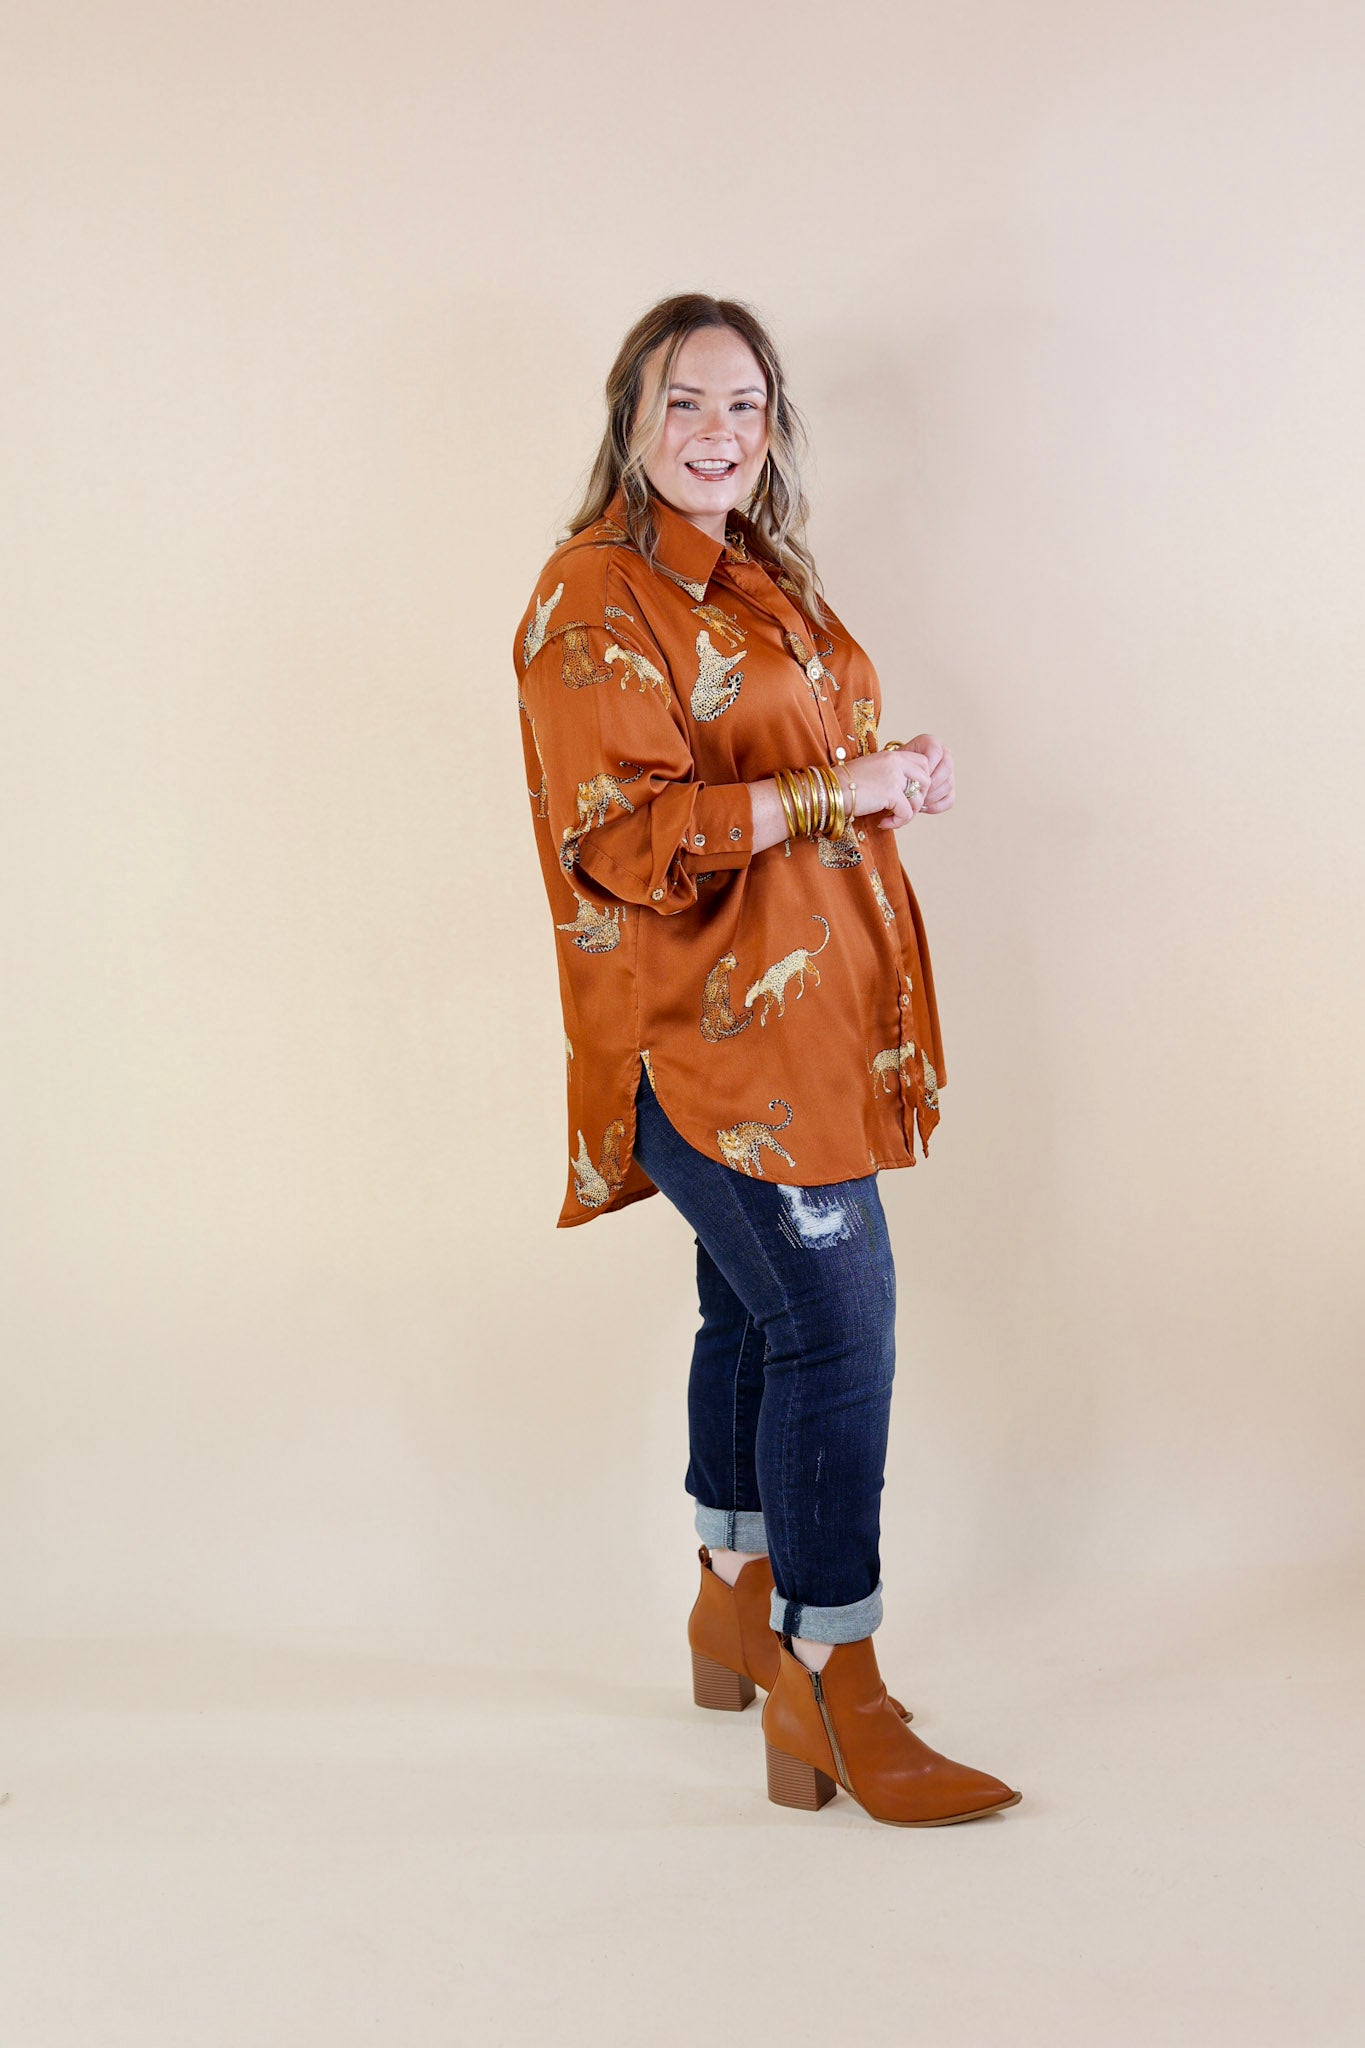 Tell Me Something Good Cheetah Print Long Sleeve Button Up Top in Camel Brown - Giddy Up Glamour Boutique